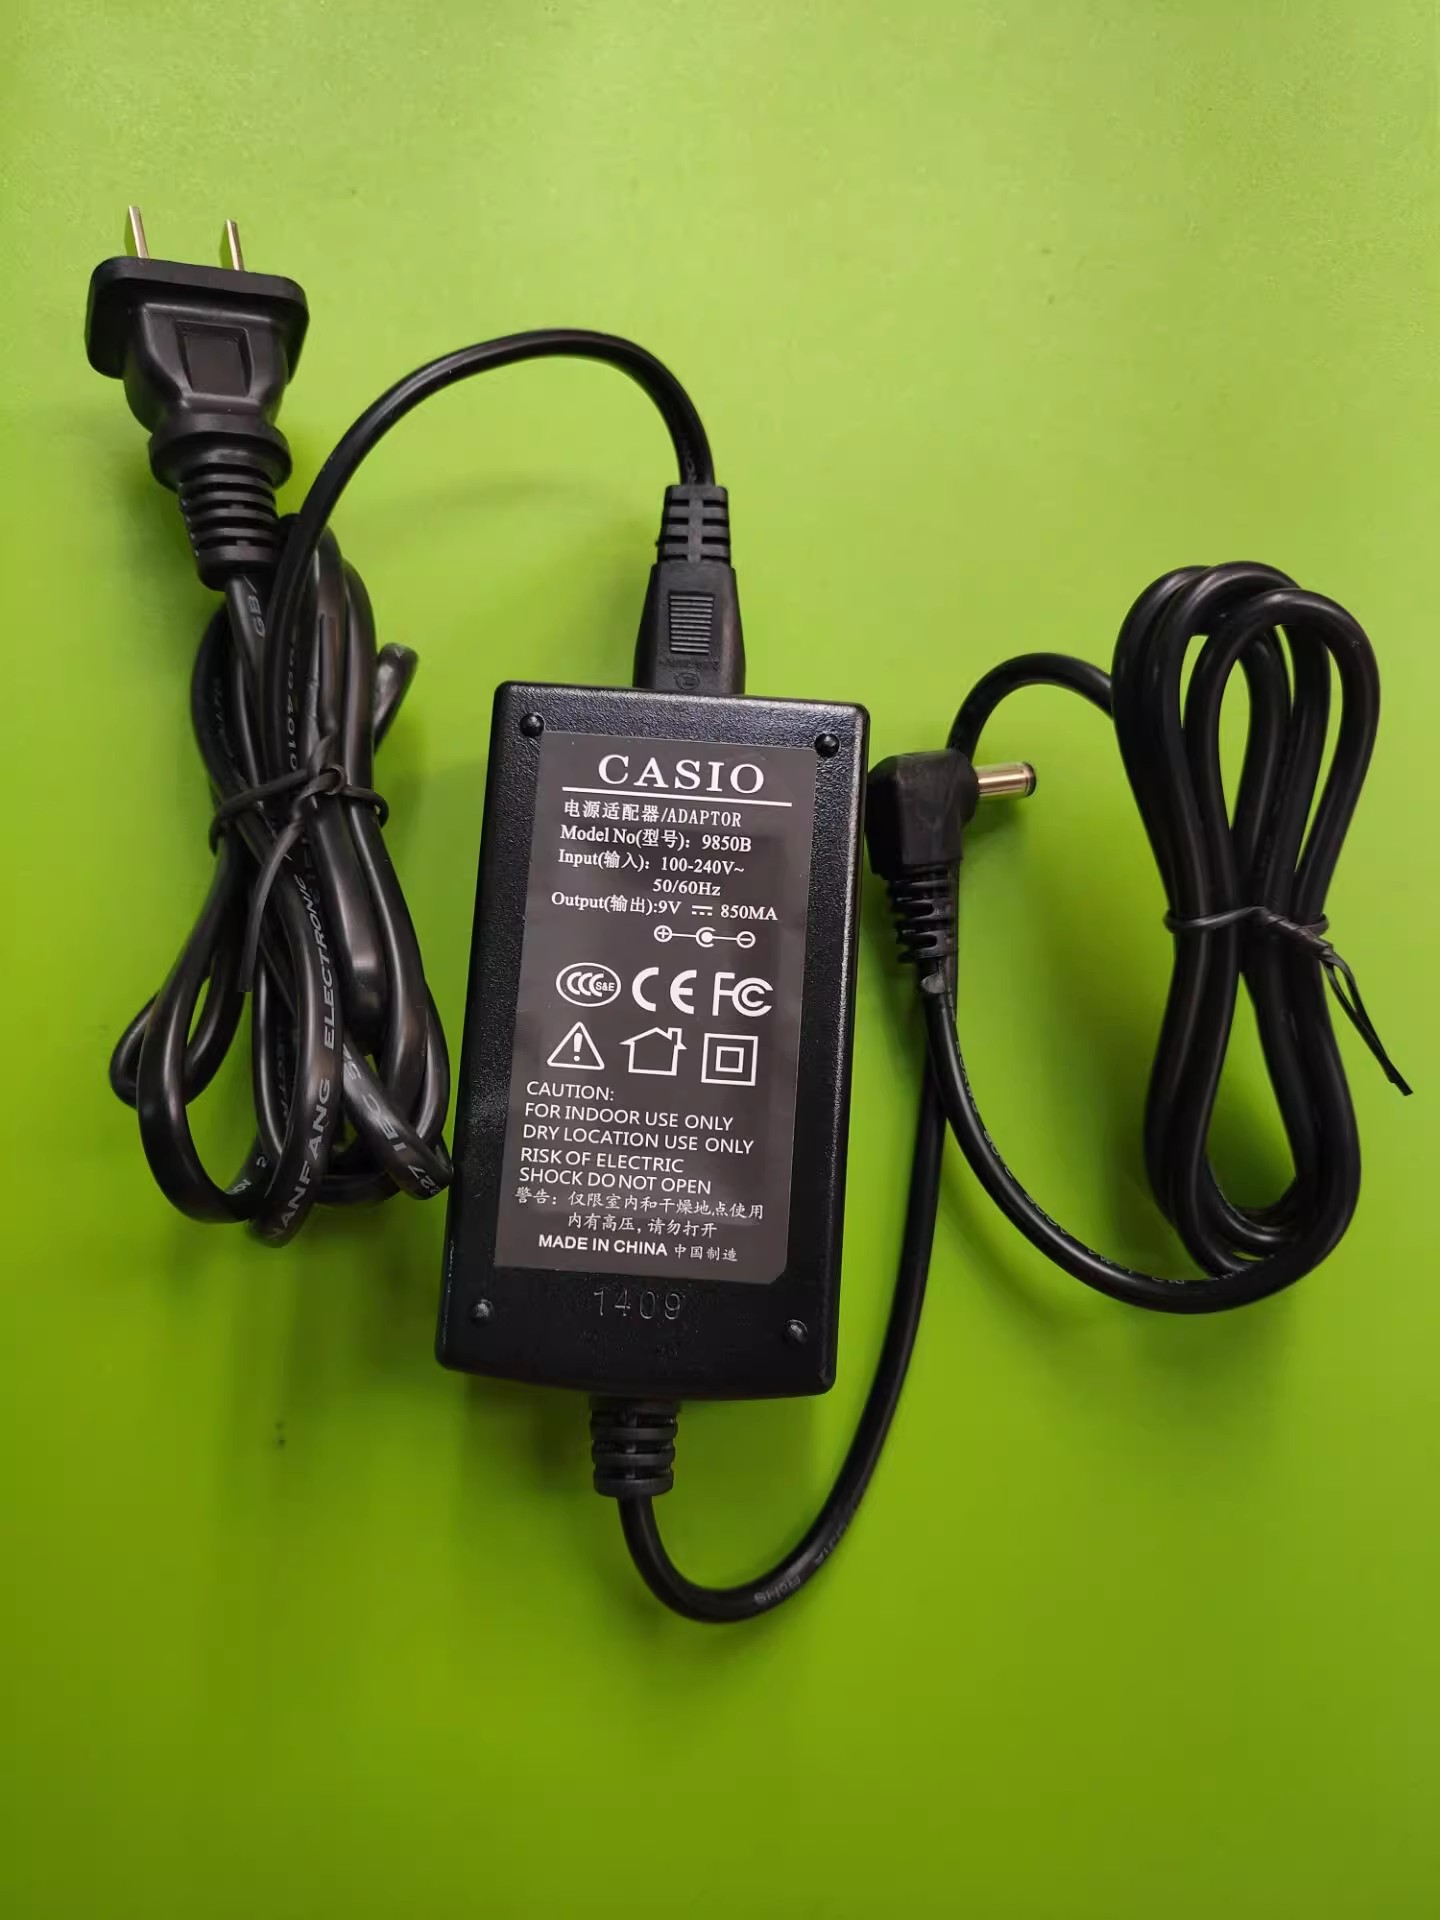 *Brand NEW* CASIO CT-310 370A CT-500 CTK550 LK48 9850B 9V 850MA AC ADAPTER POWER Supply - Click Image to Close